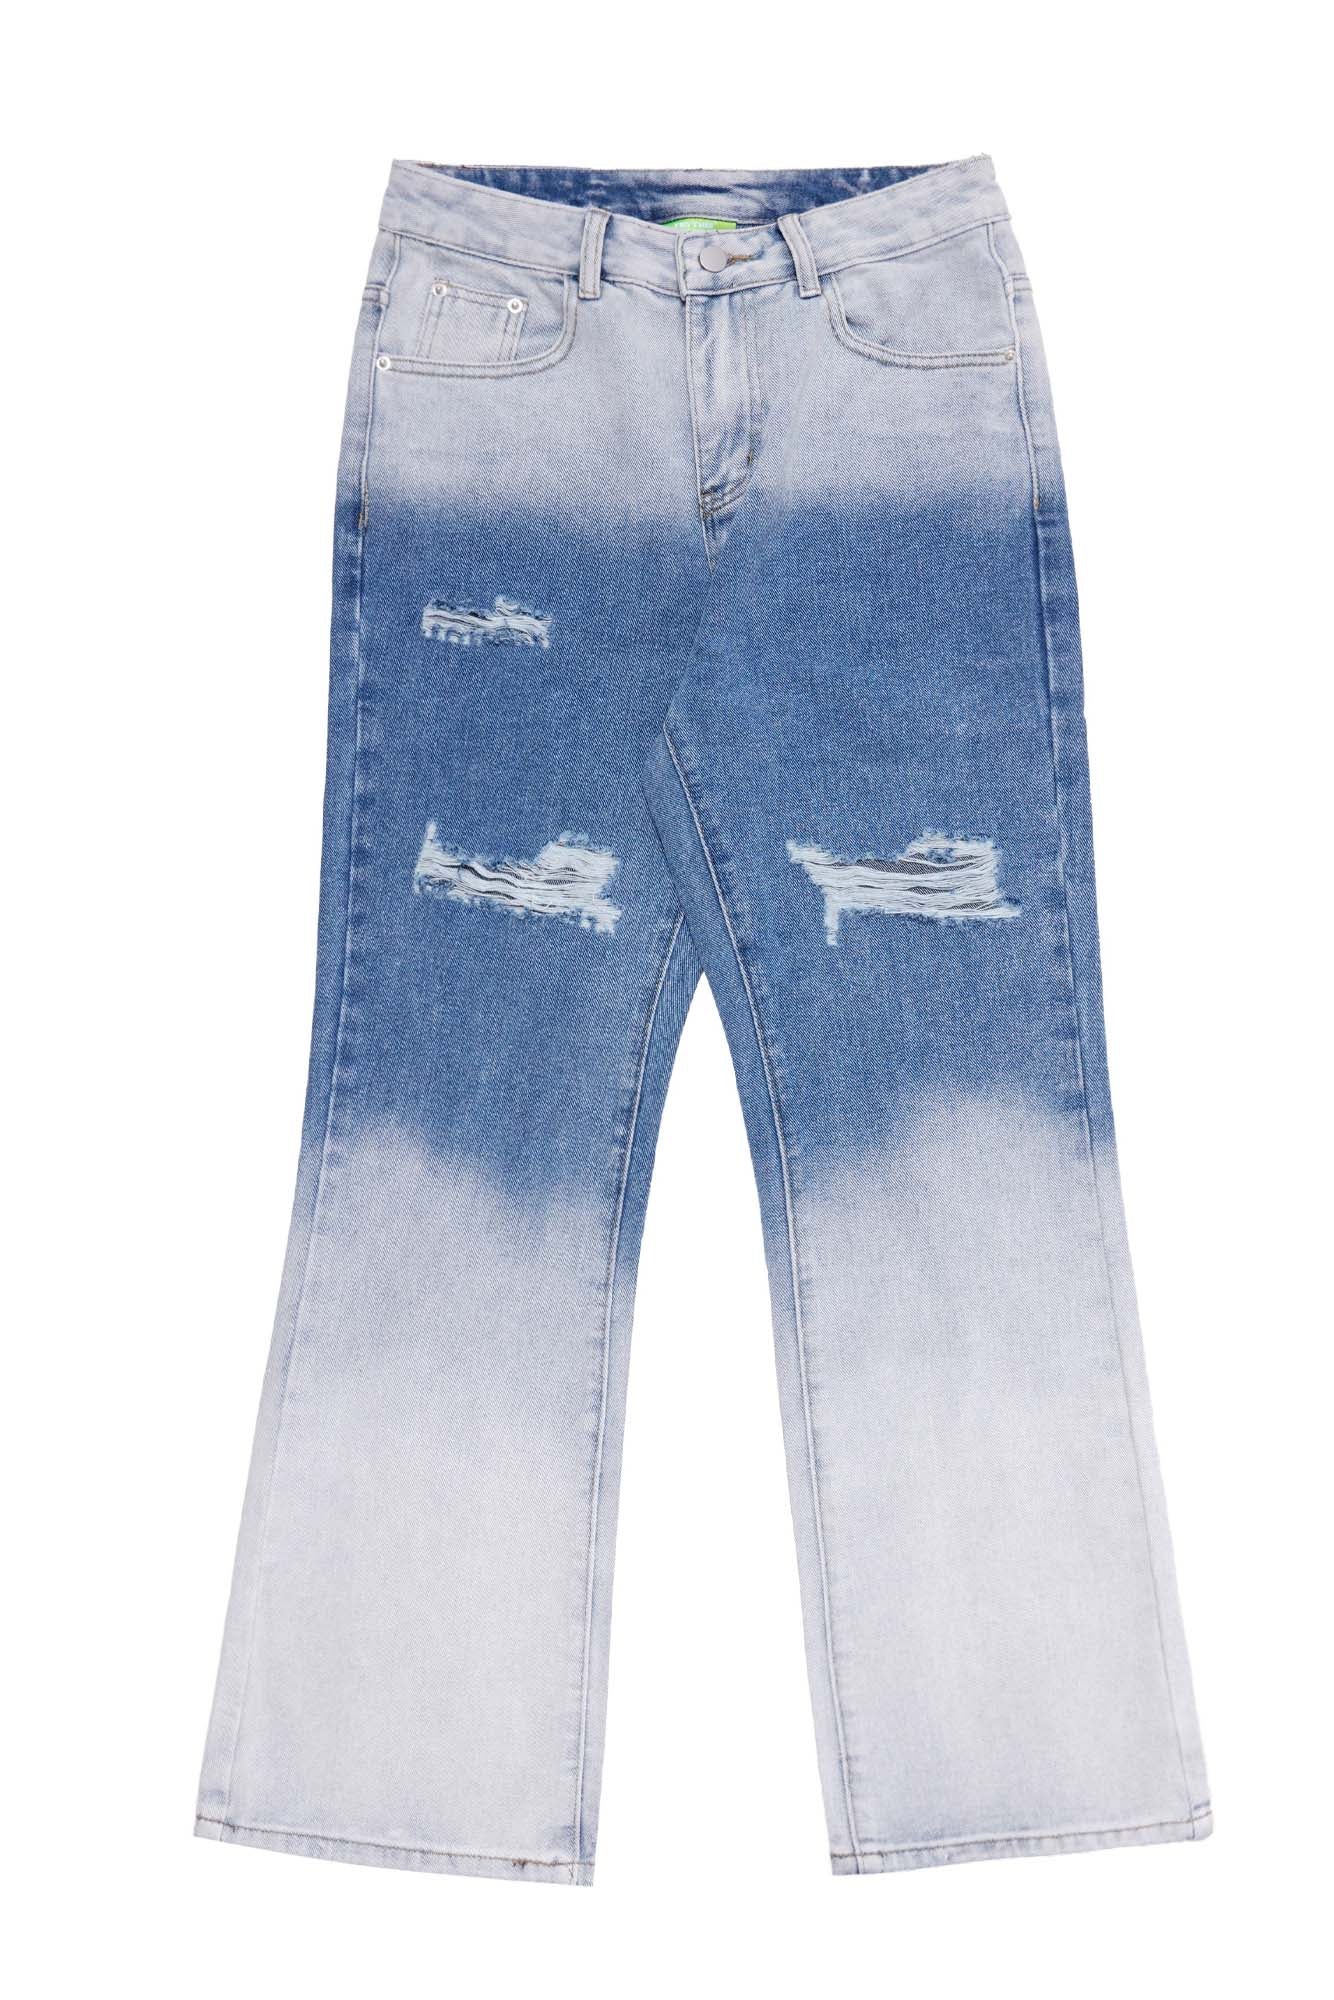 FADE TO BLUE VALKYRE JEANS